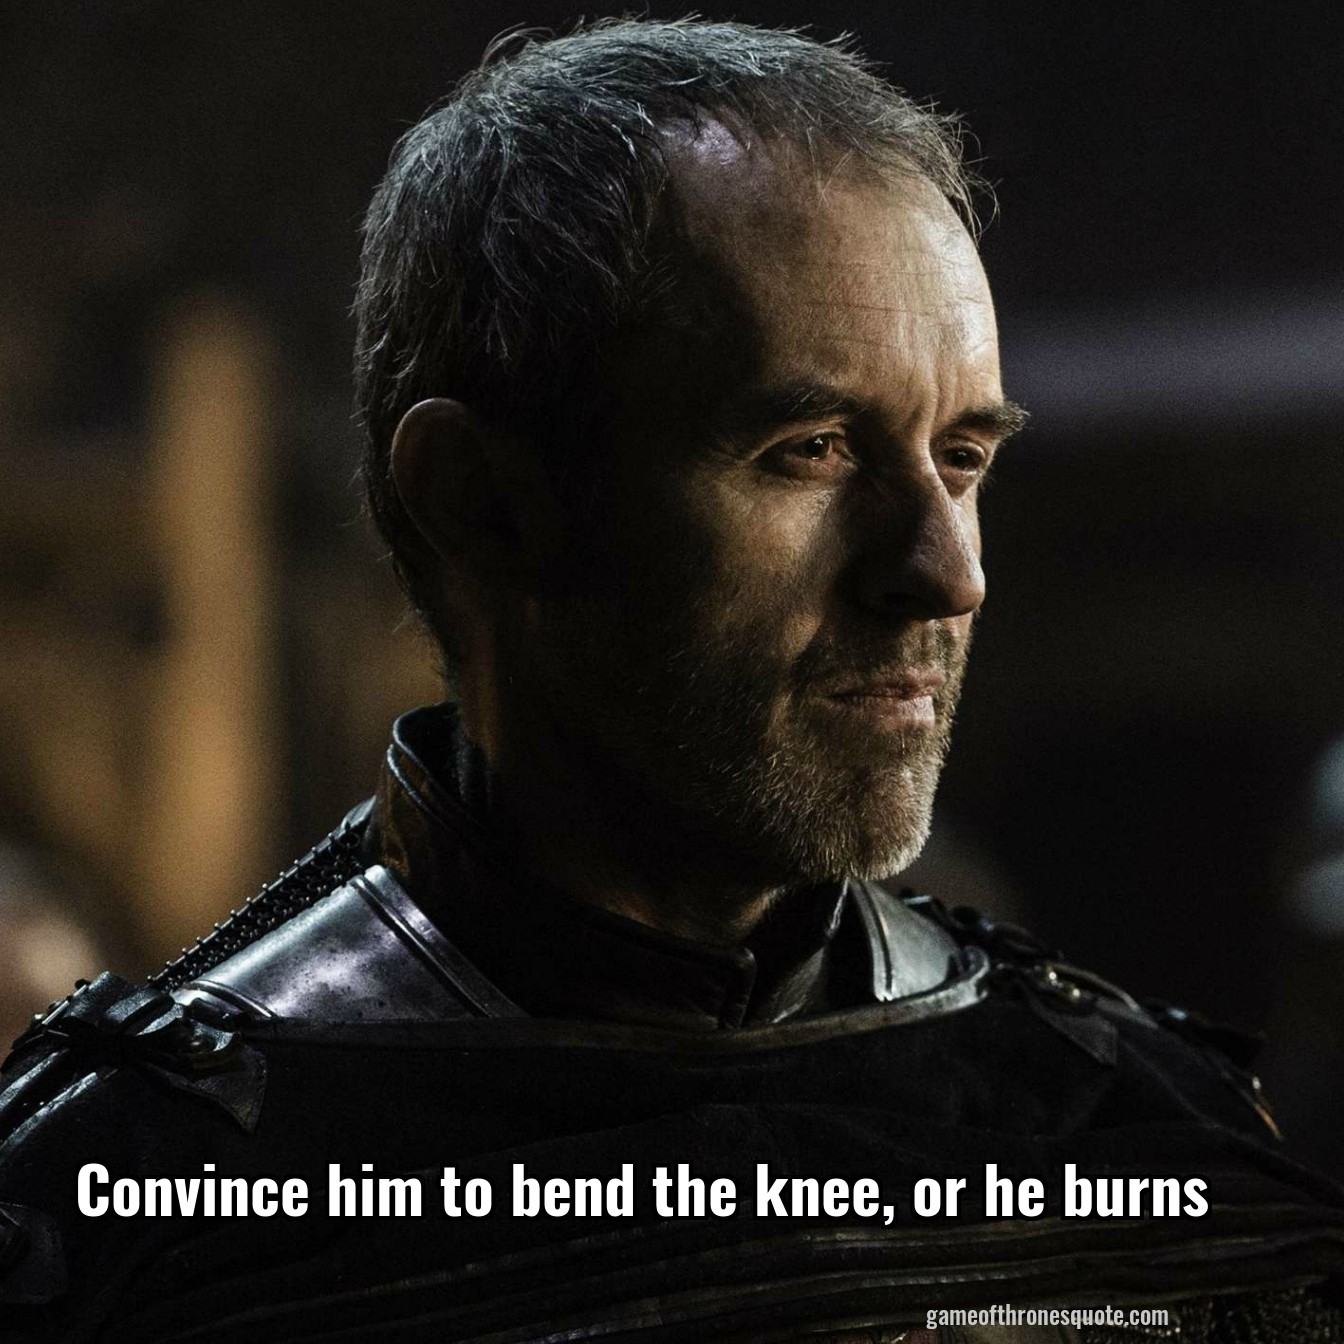 Convince him to bend the knee, or he burns